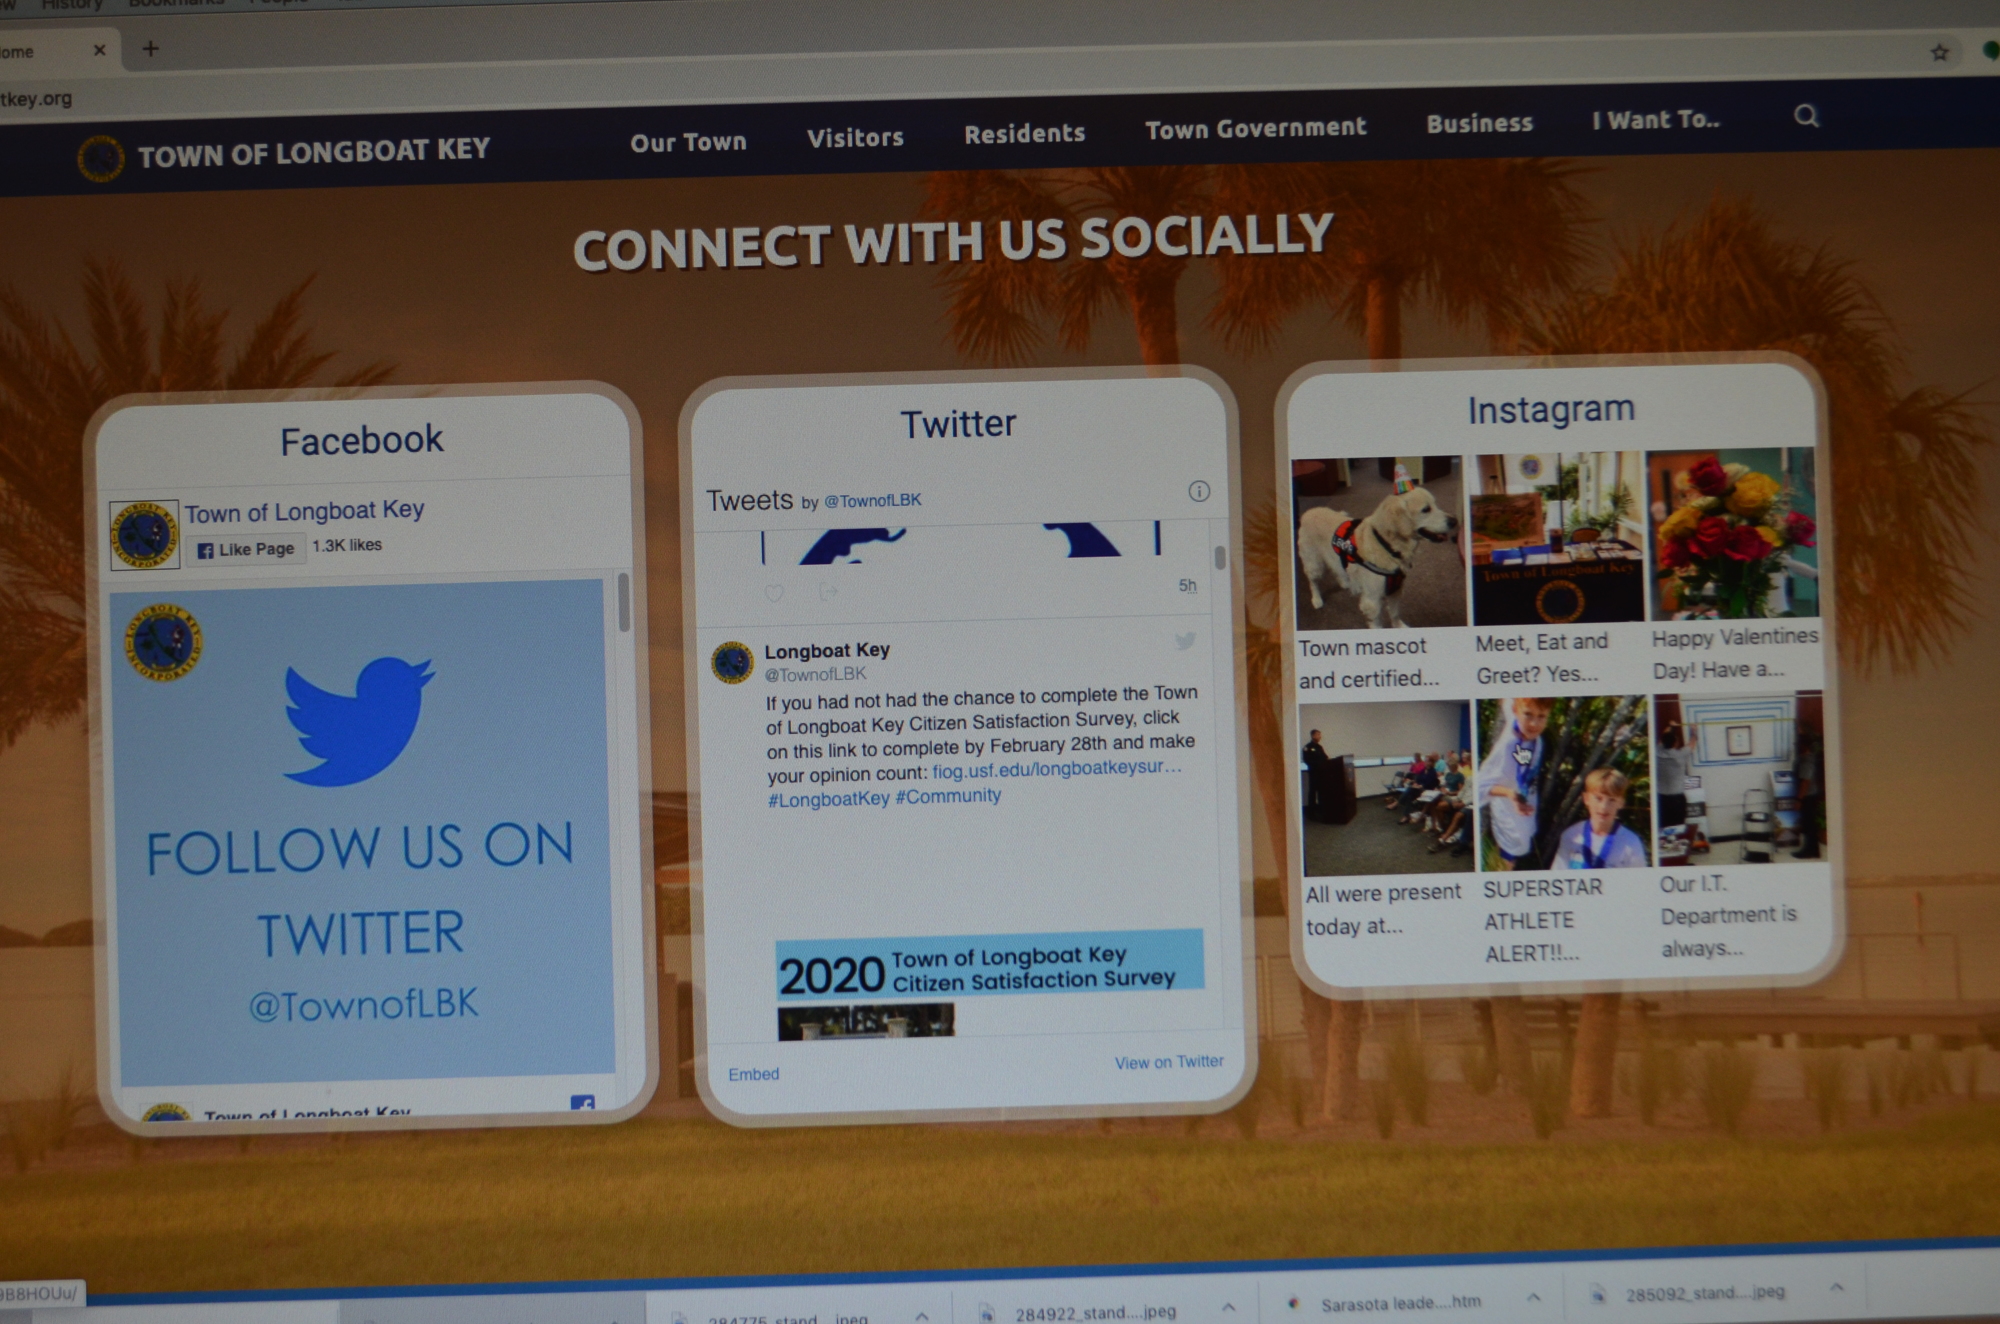 The town's social media feeds are displayed on longboatkey.org home page now.